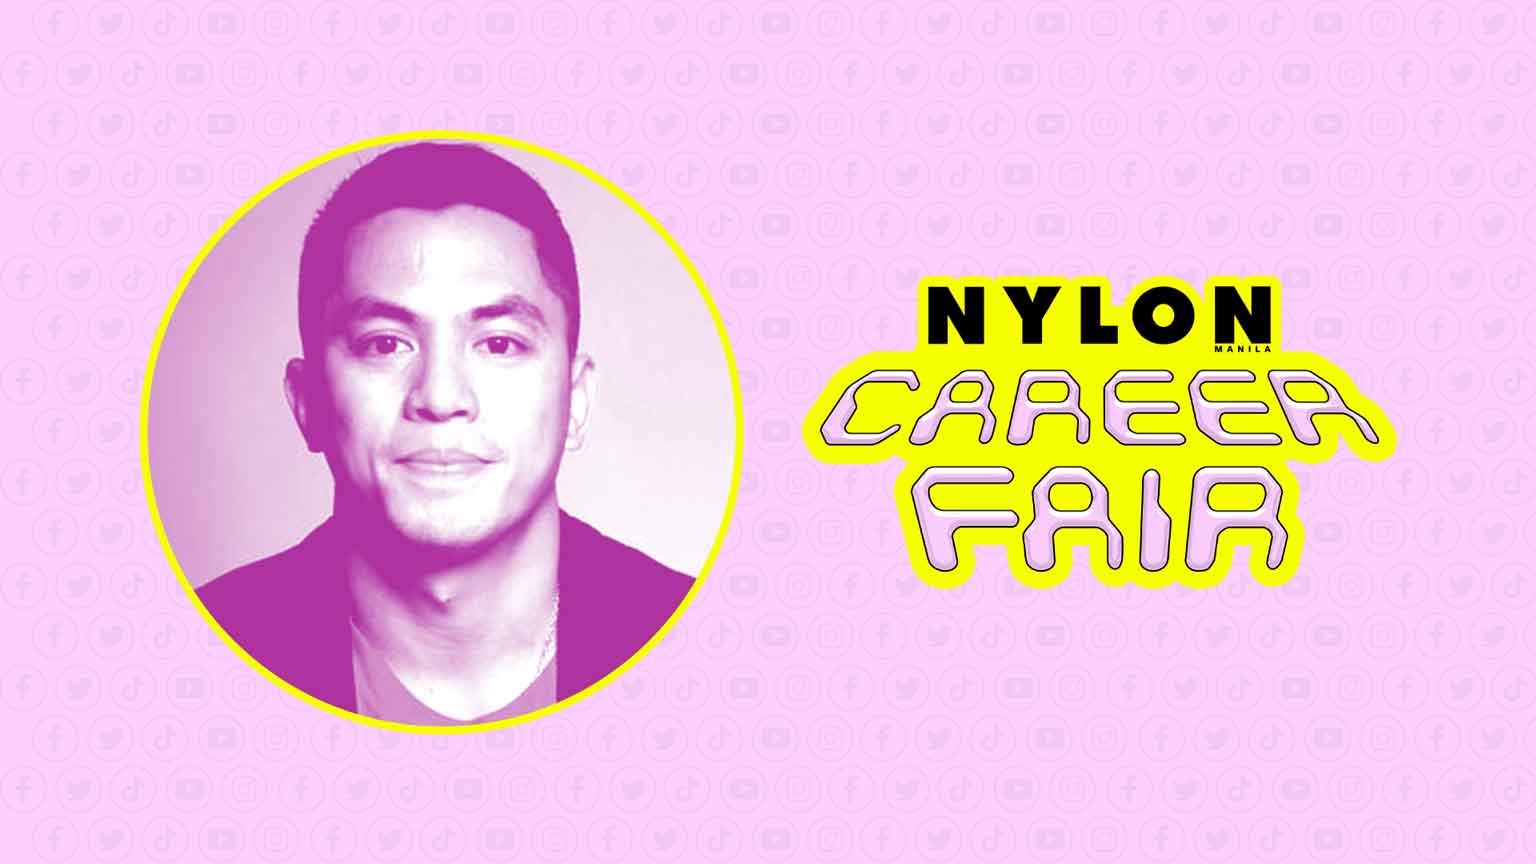 Know What It’s Like To Have A Career In Digital Marketing in Rambo Nuñez Ortega’s Talk For NYLON Manila’s Career Fair